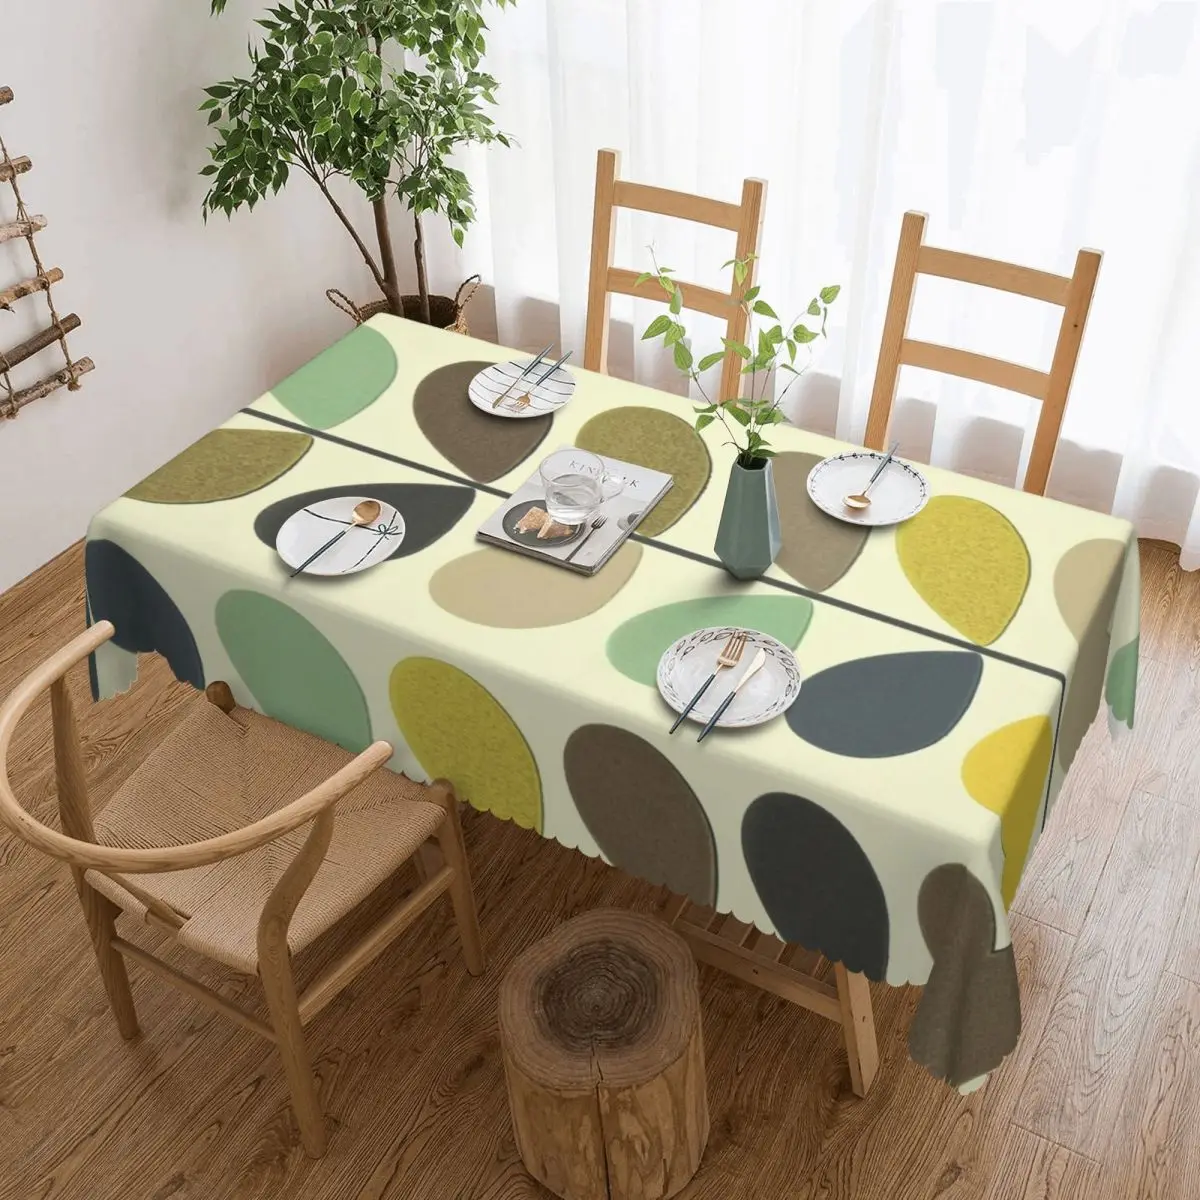 

Abstract Orla Kiely Multi Stem Tablecloth Rectangular Oilproof Mid Century Scandinavian Table Cloth Cover for Kitchen